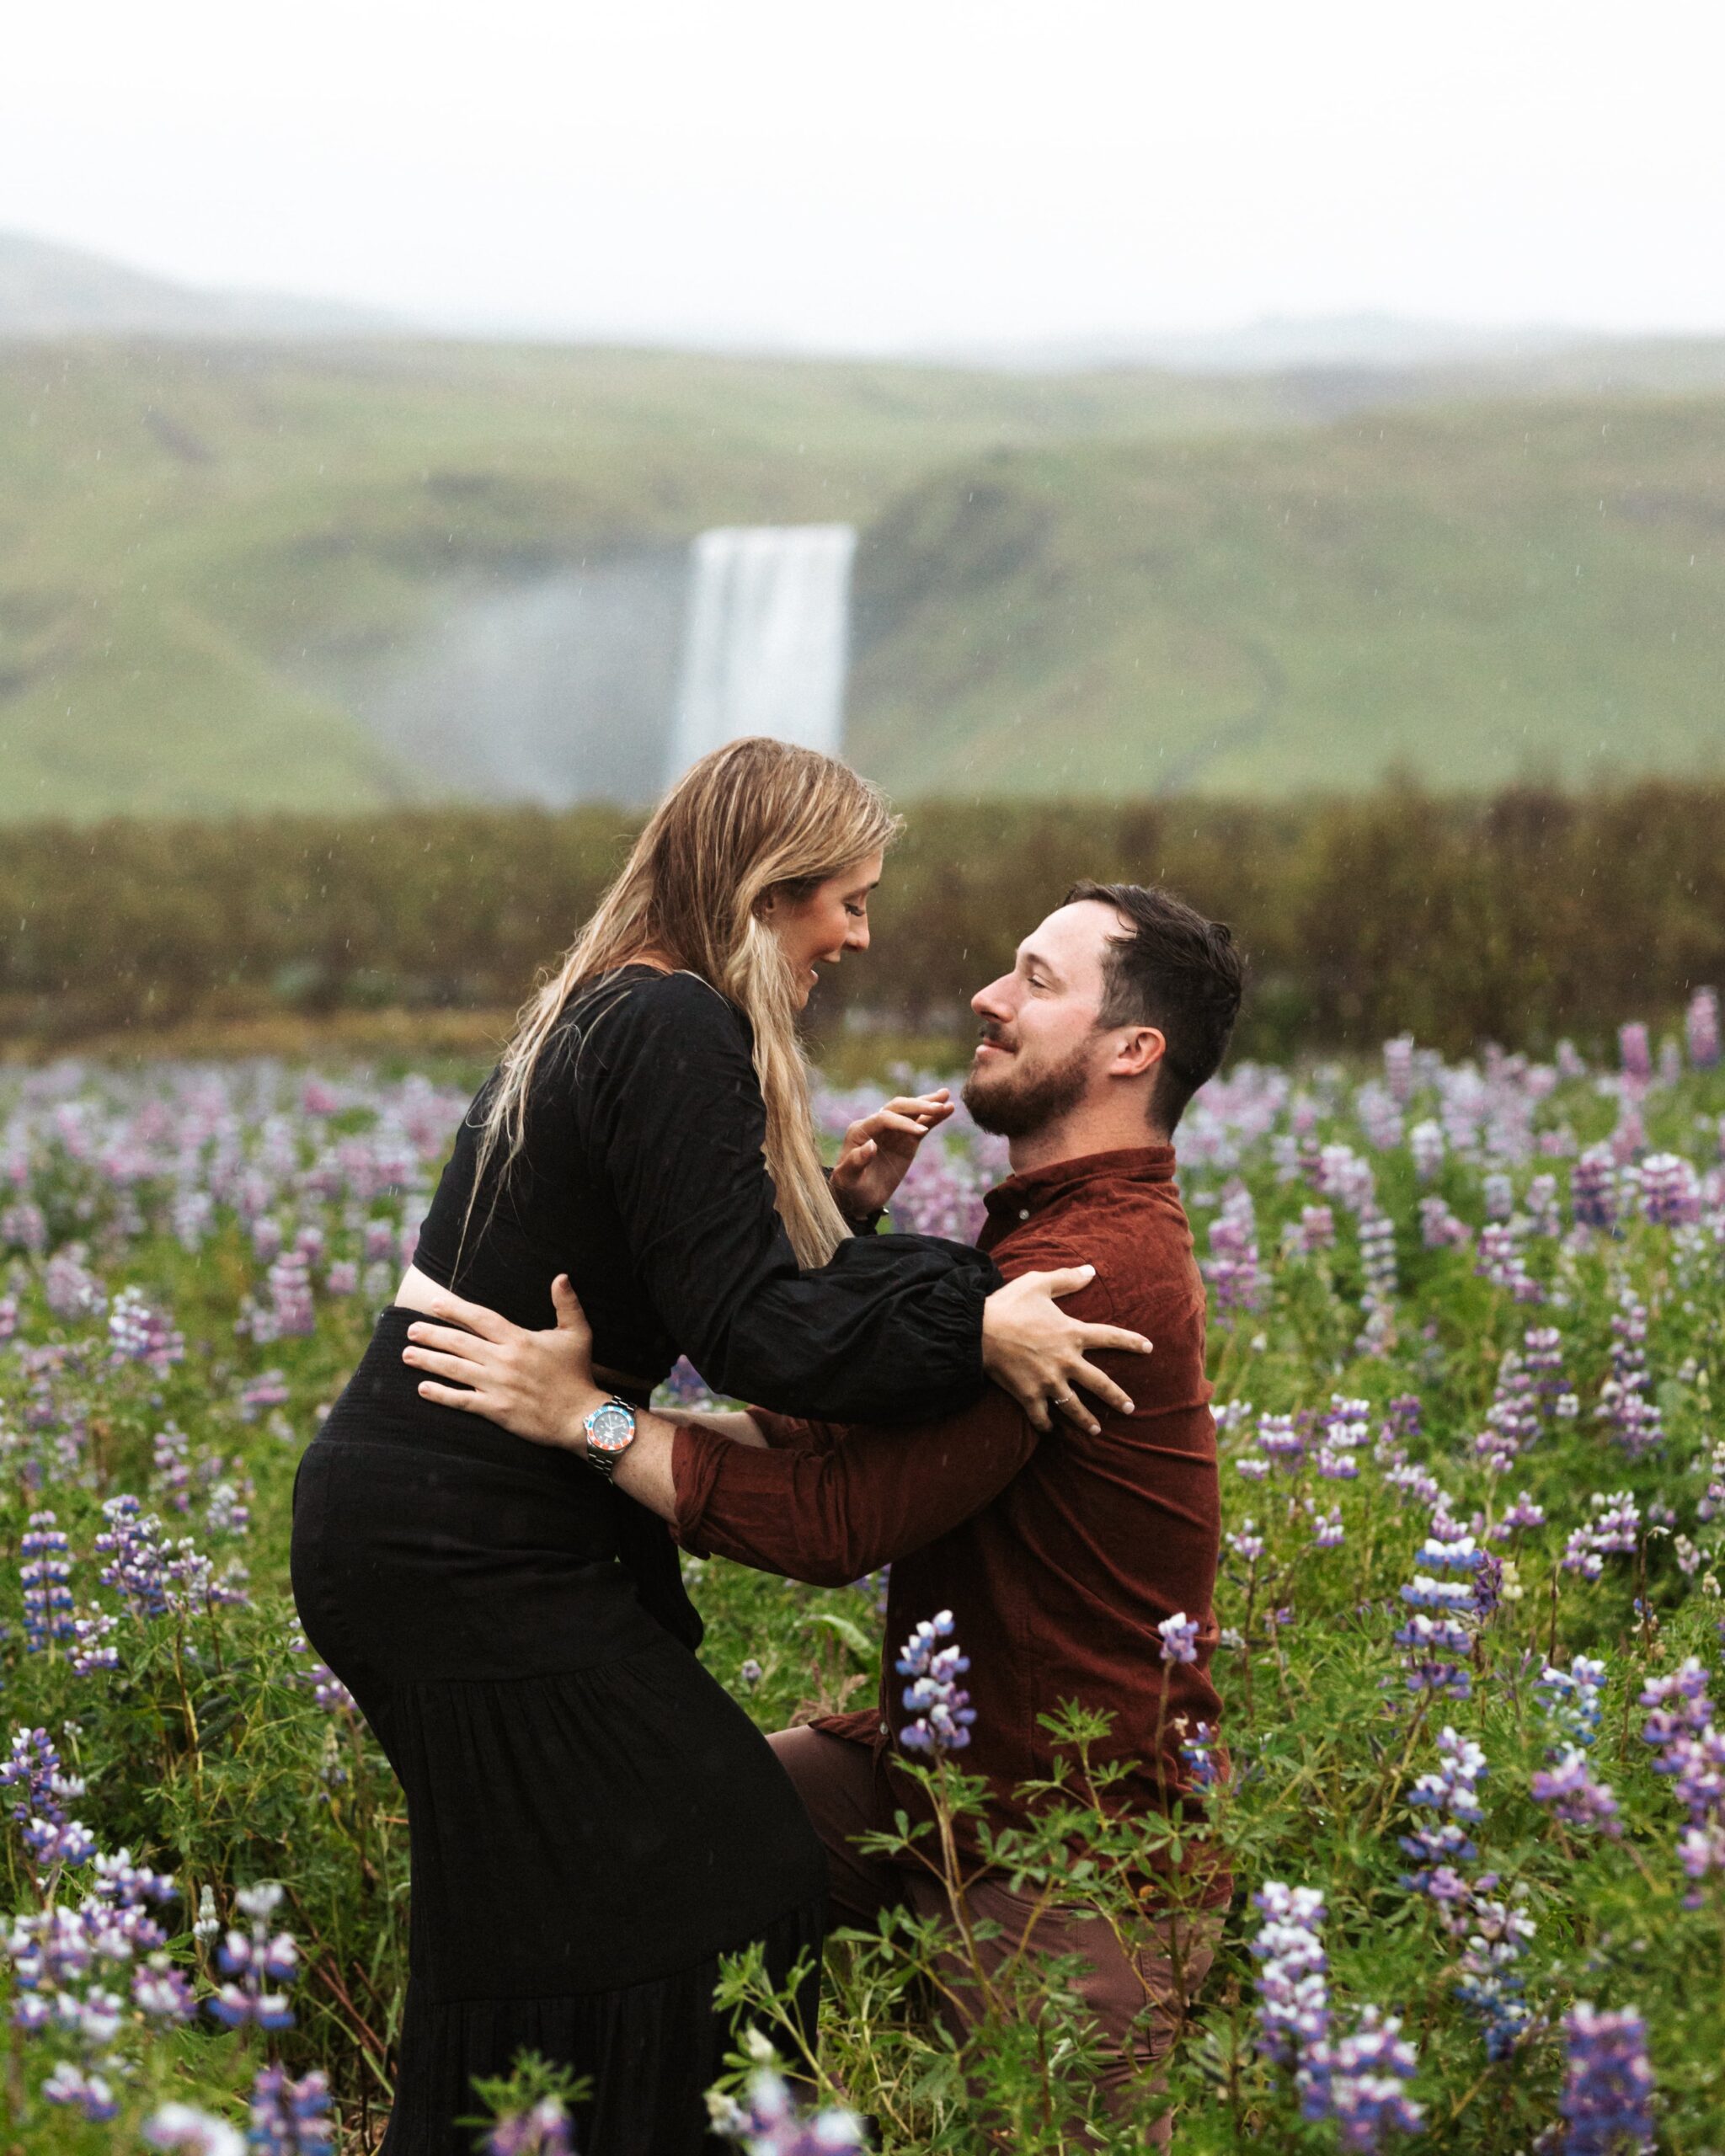 A girl says yes to a proposal in a lupin field by Skogafoss waterfall in Iceland.